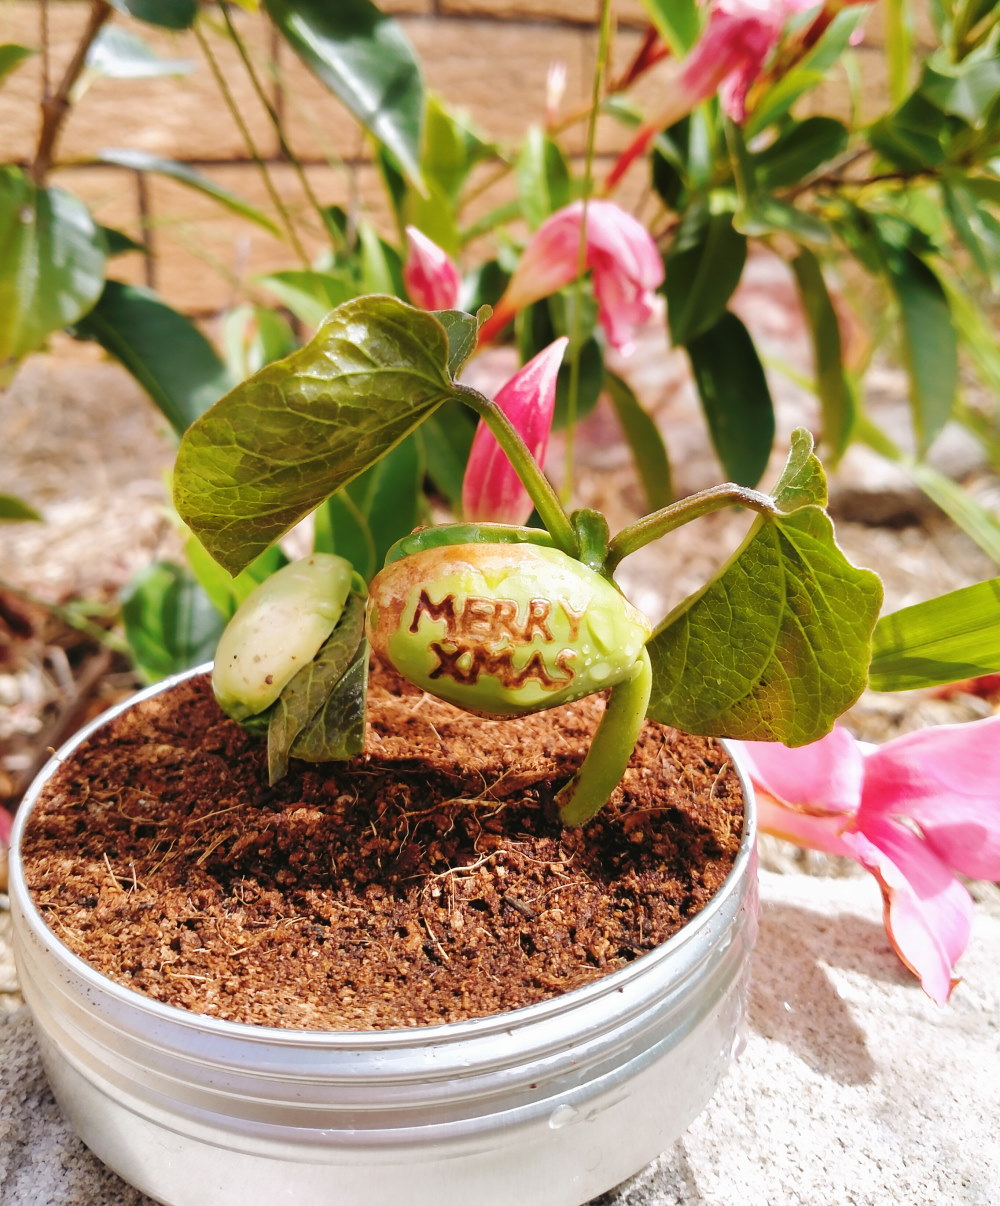 eco friendly merry xmas gift message bean sprouting